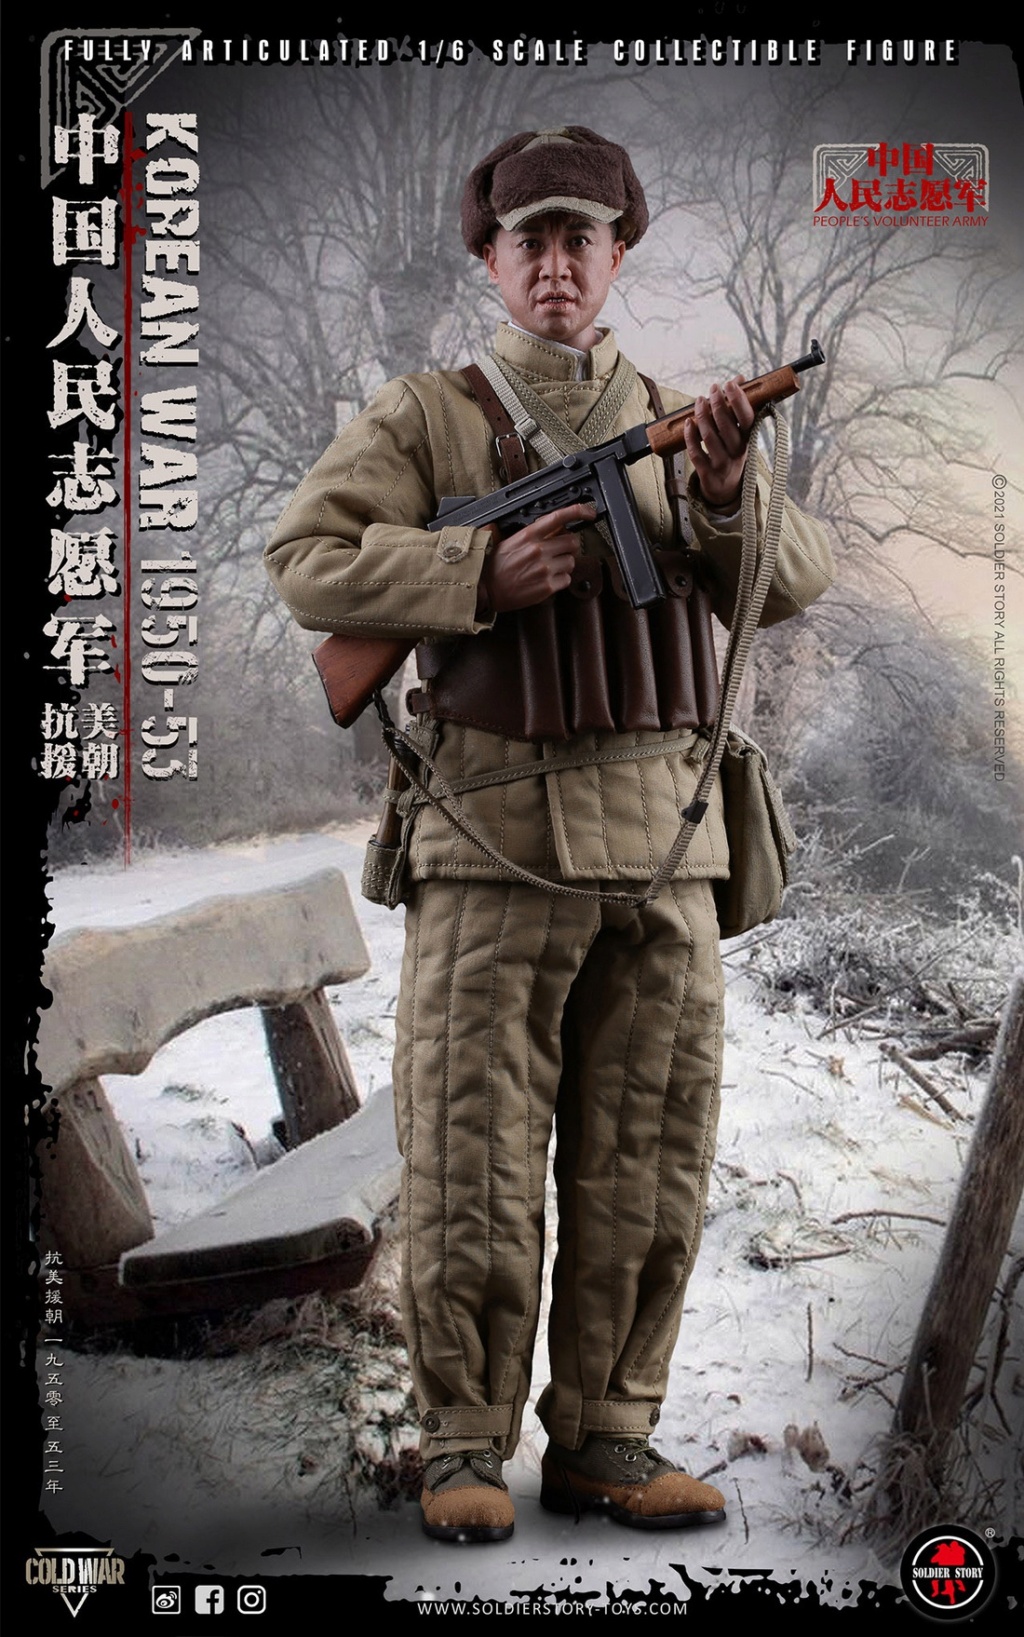 NEW PRODUCT: SOLDIER STORY: 1/6 Chinese People’s Volunteers 1950-53 Collectible Action Figure (#SS-124) Ddbcb110